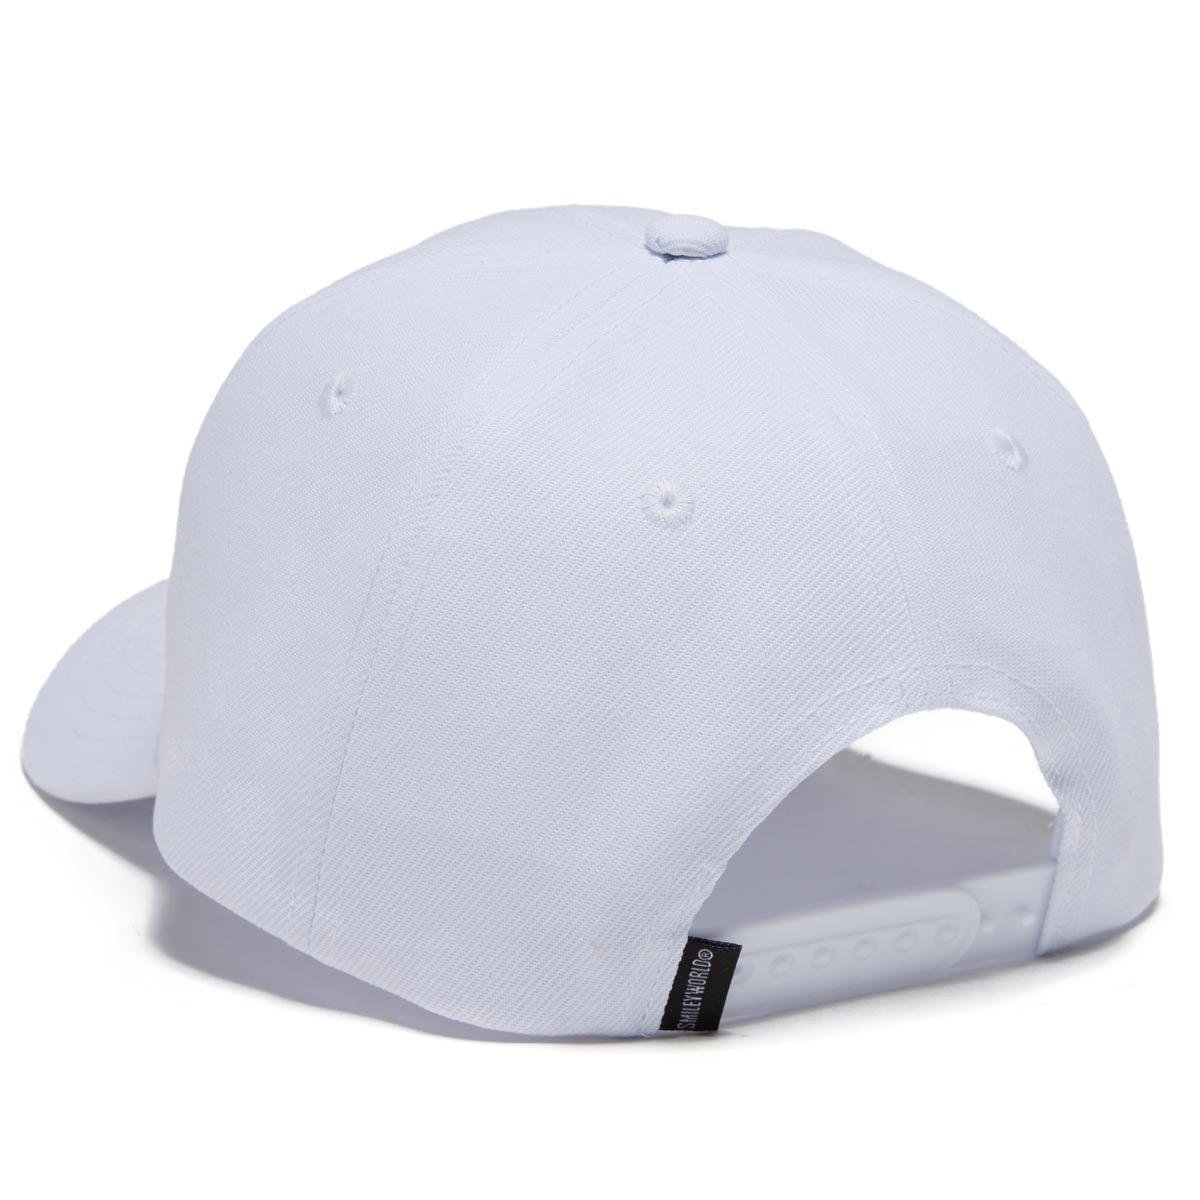 Grizzly x Smiley World Dad Hat - White image 2